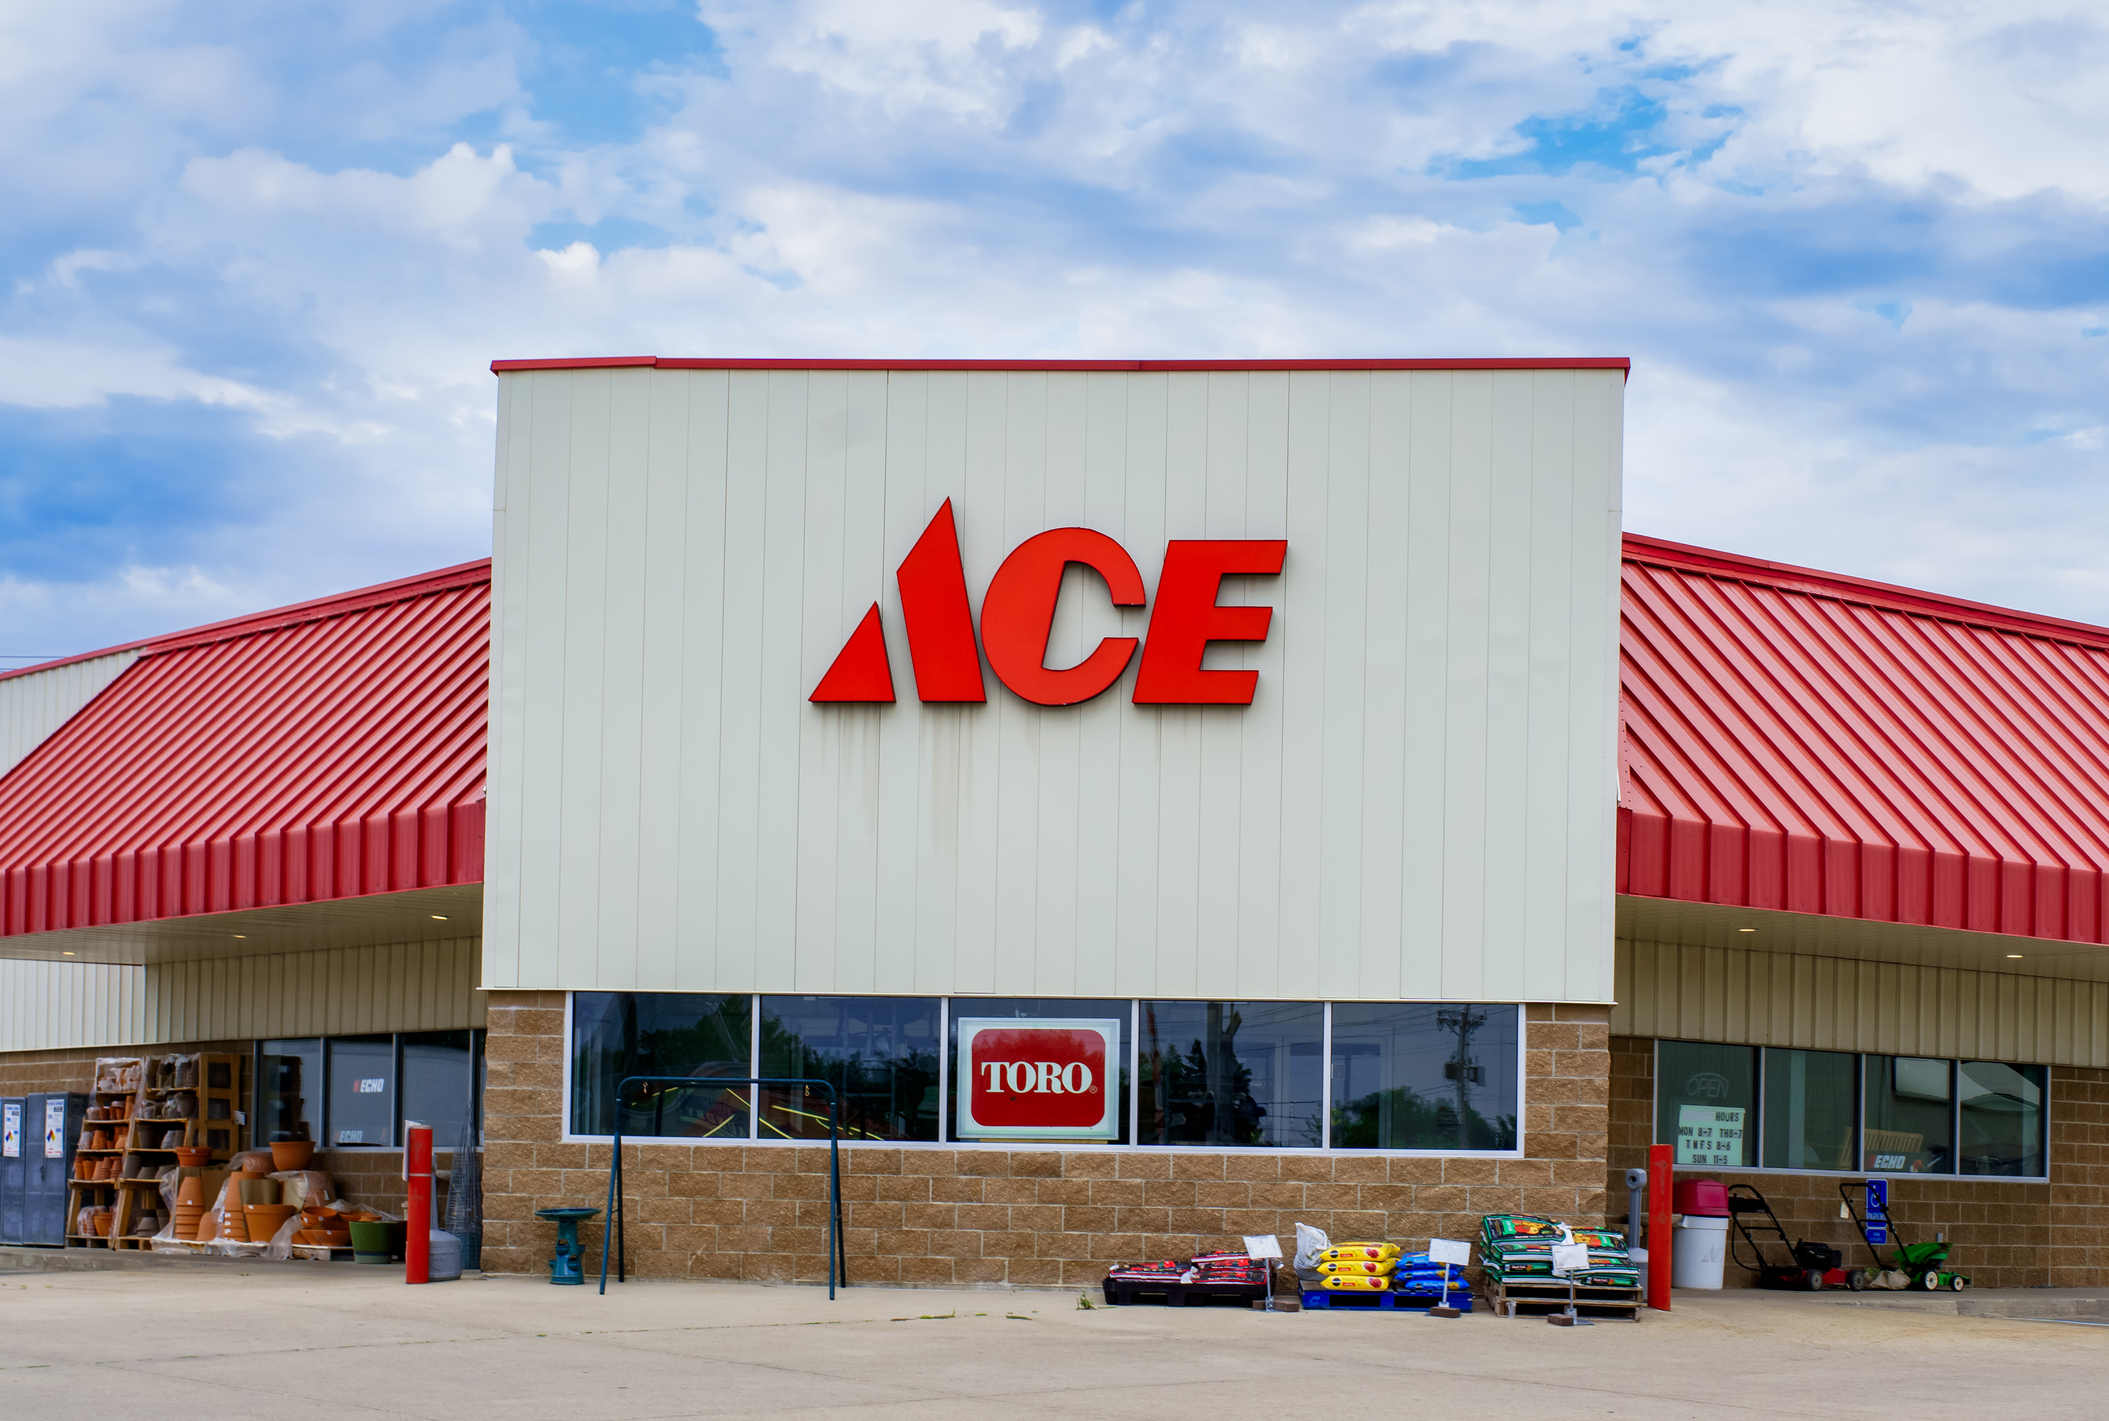 Today only: Take 50% off one item under $30 at Ace Hardware